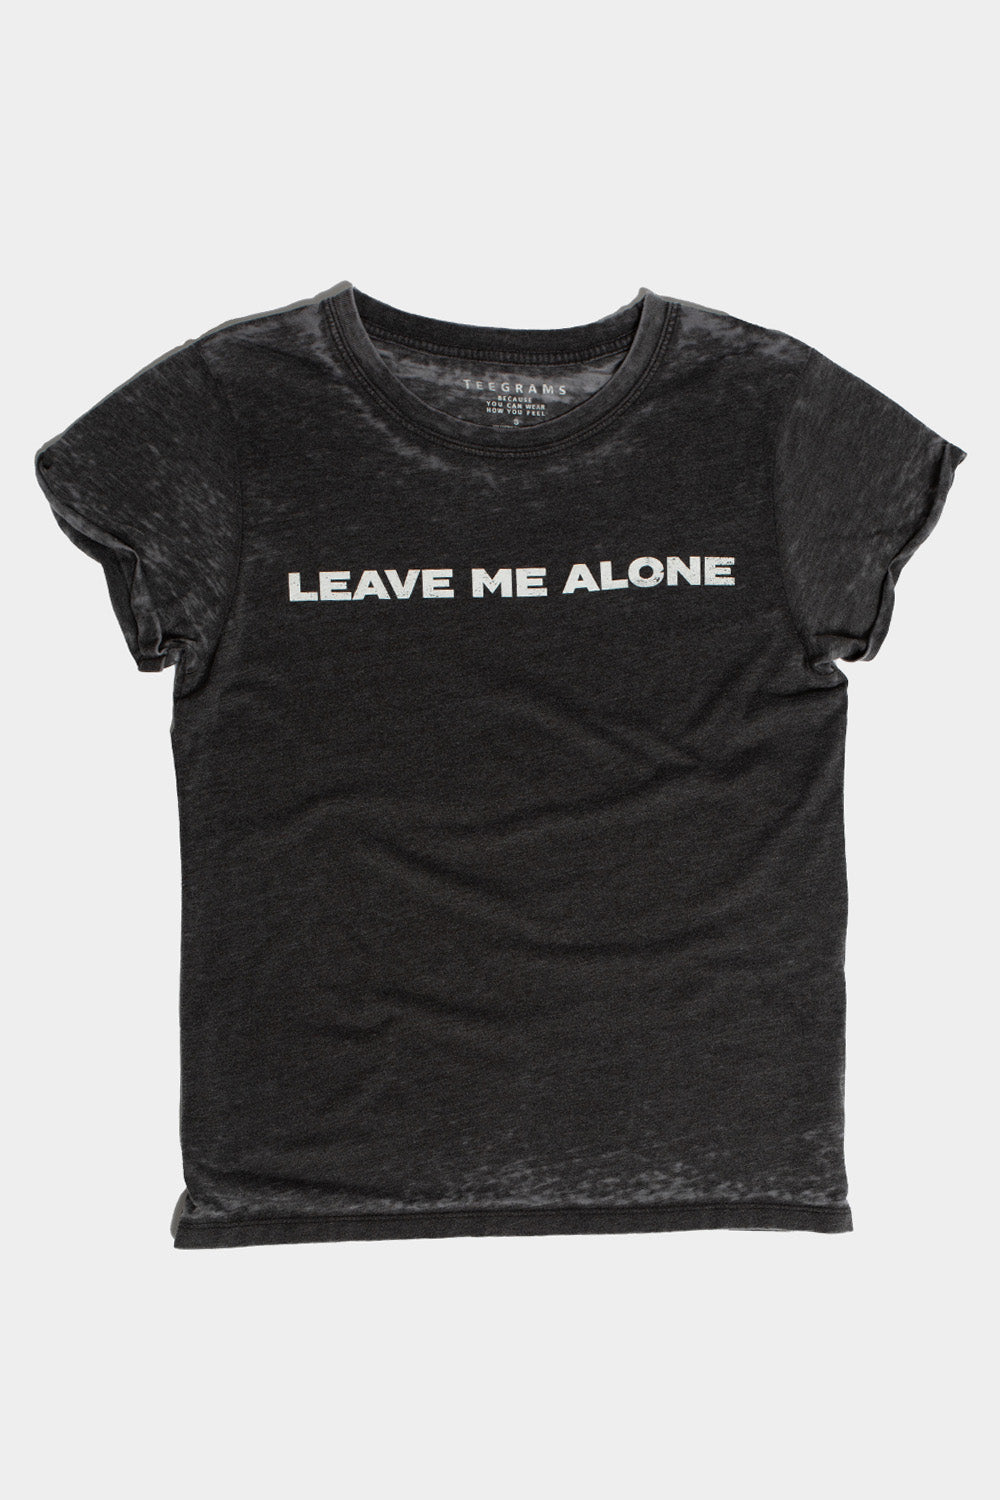 Leave Me Alone Fitted Tee